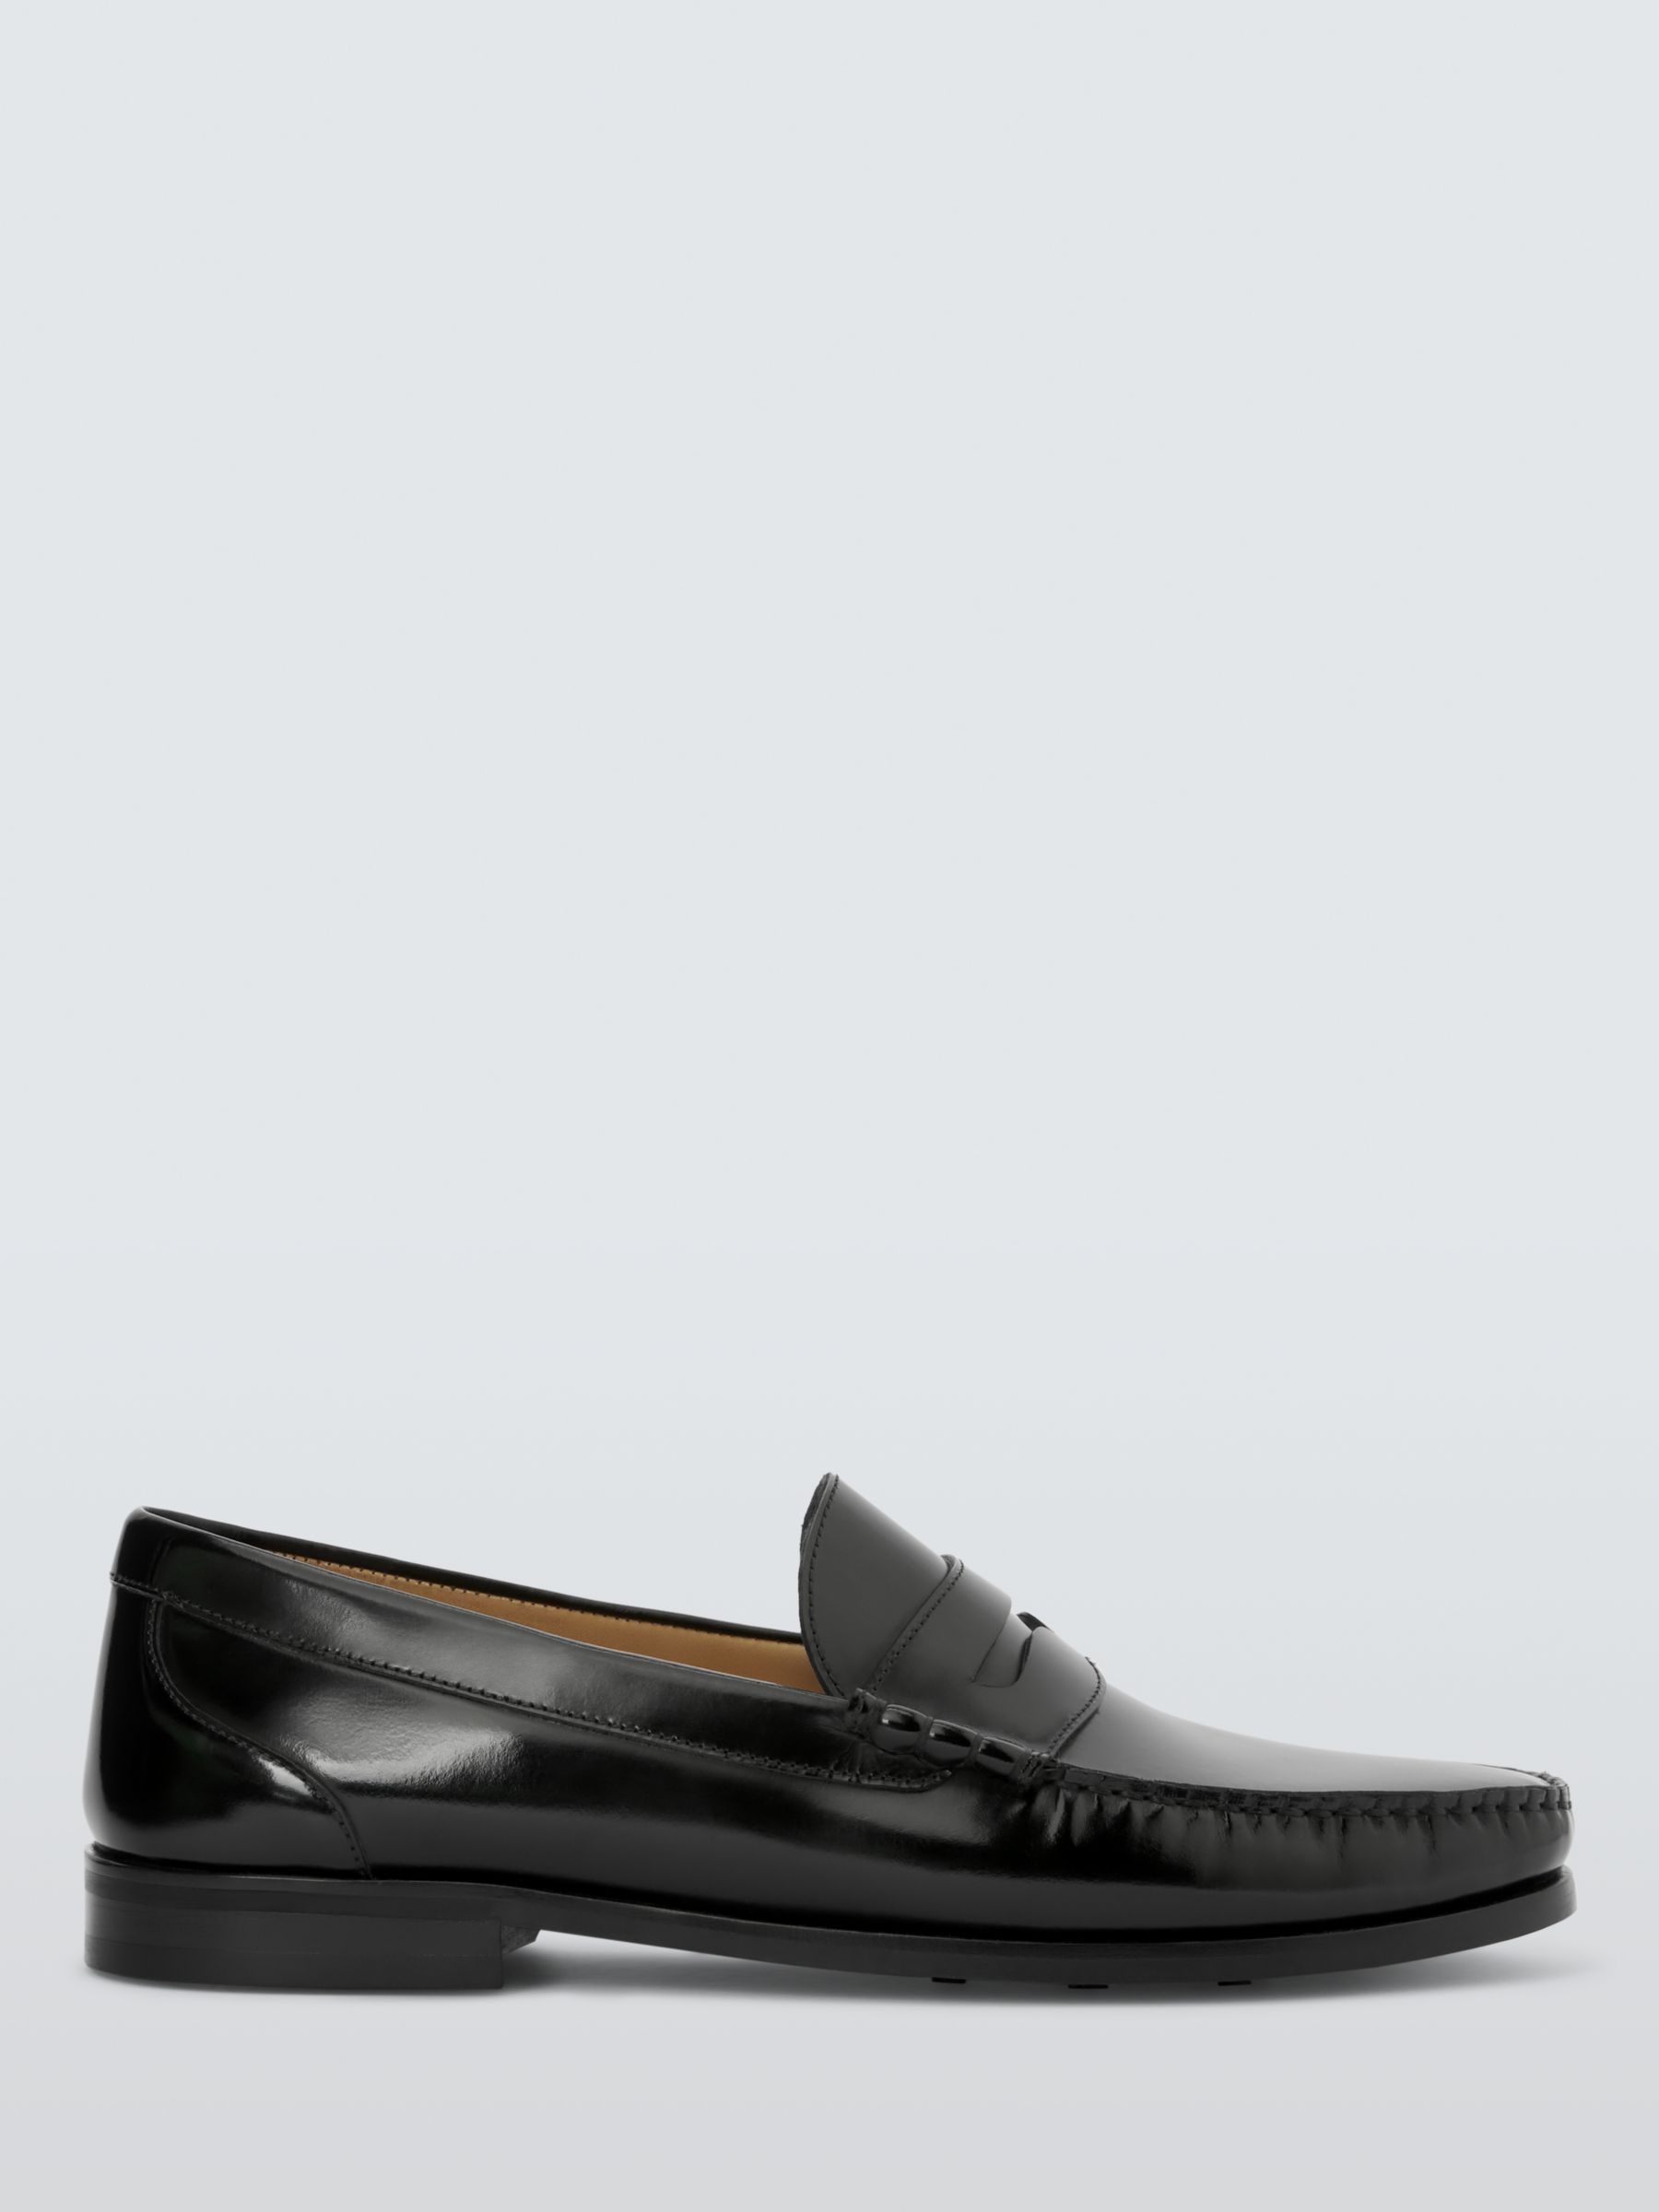 John Lewis Cornell Leather Loafers, Black, 9